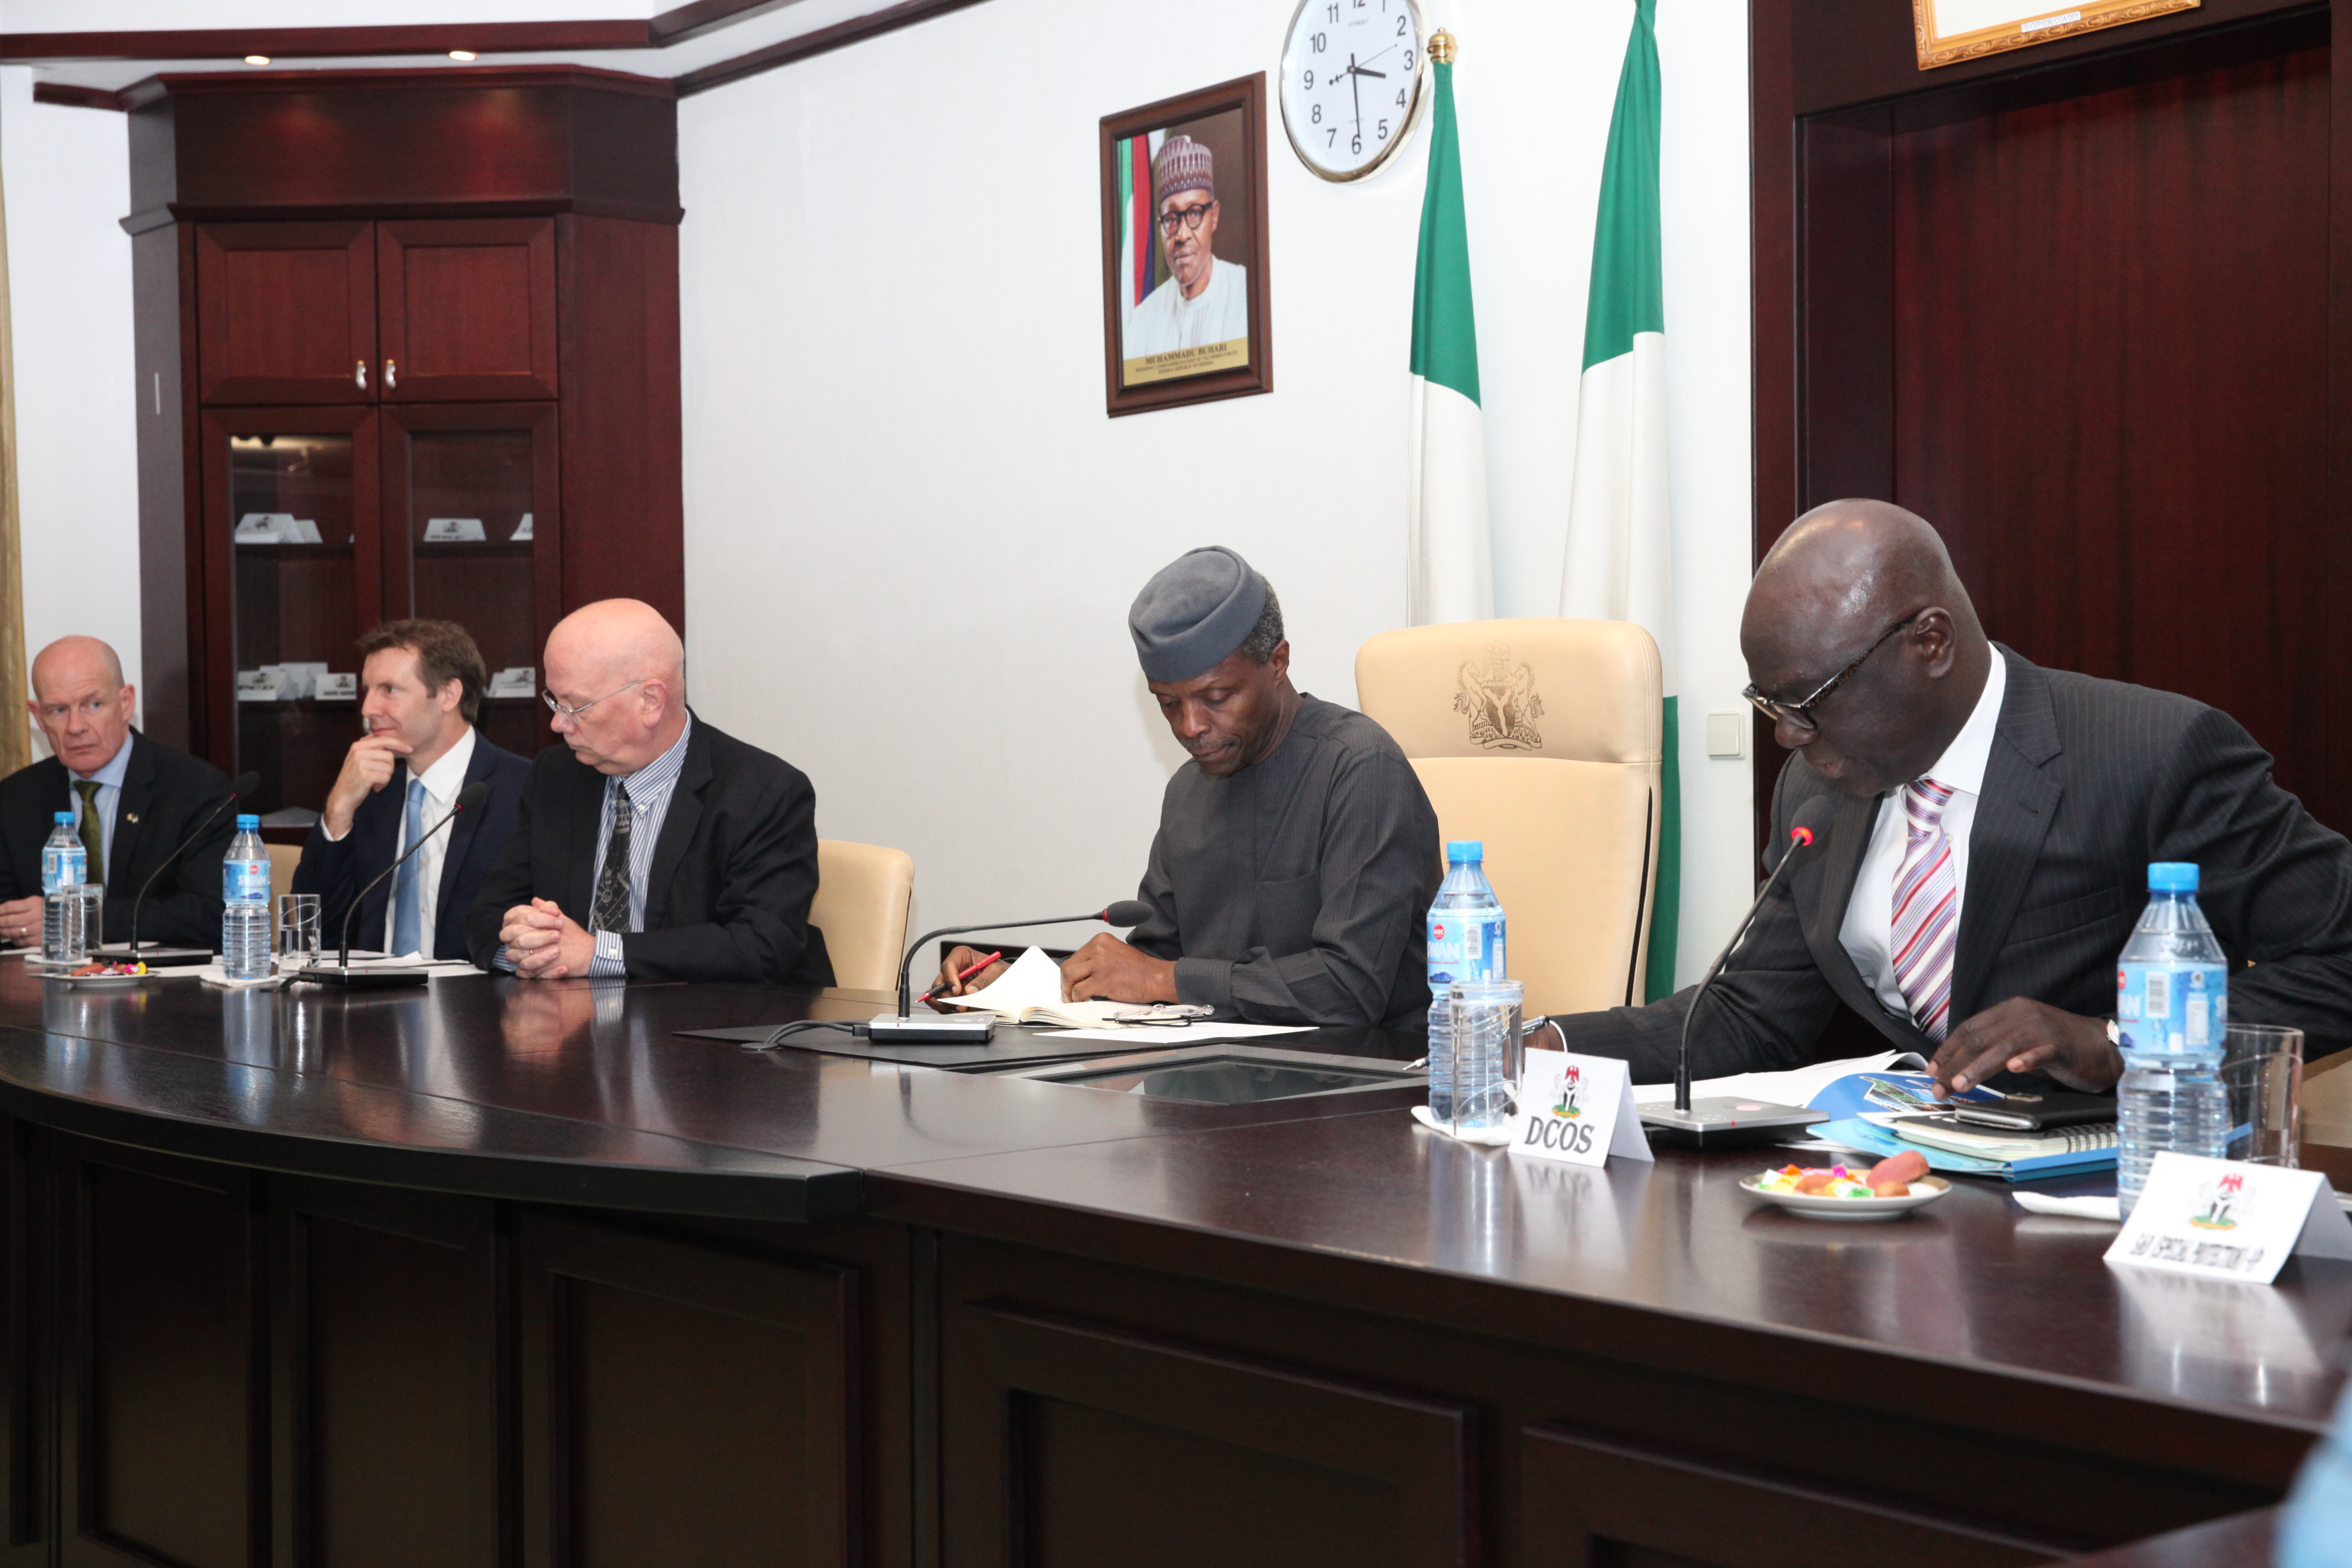 VP Osinbajo Has Discussions With Ambassadors On Support For Government In The North East On 18/01/2016